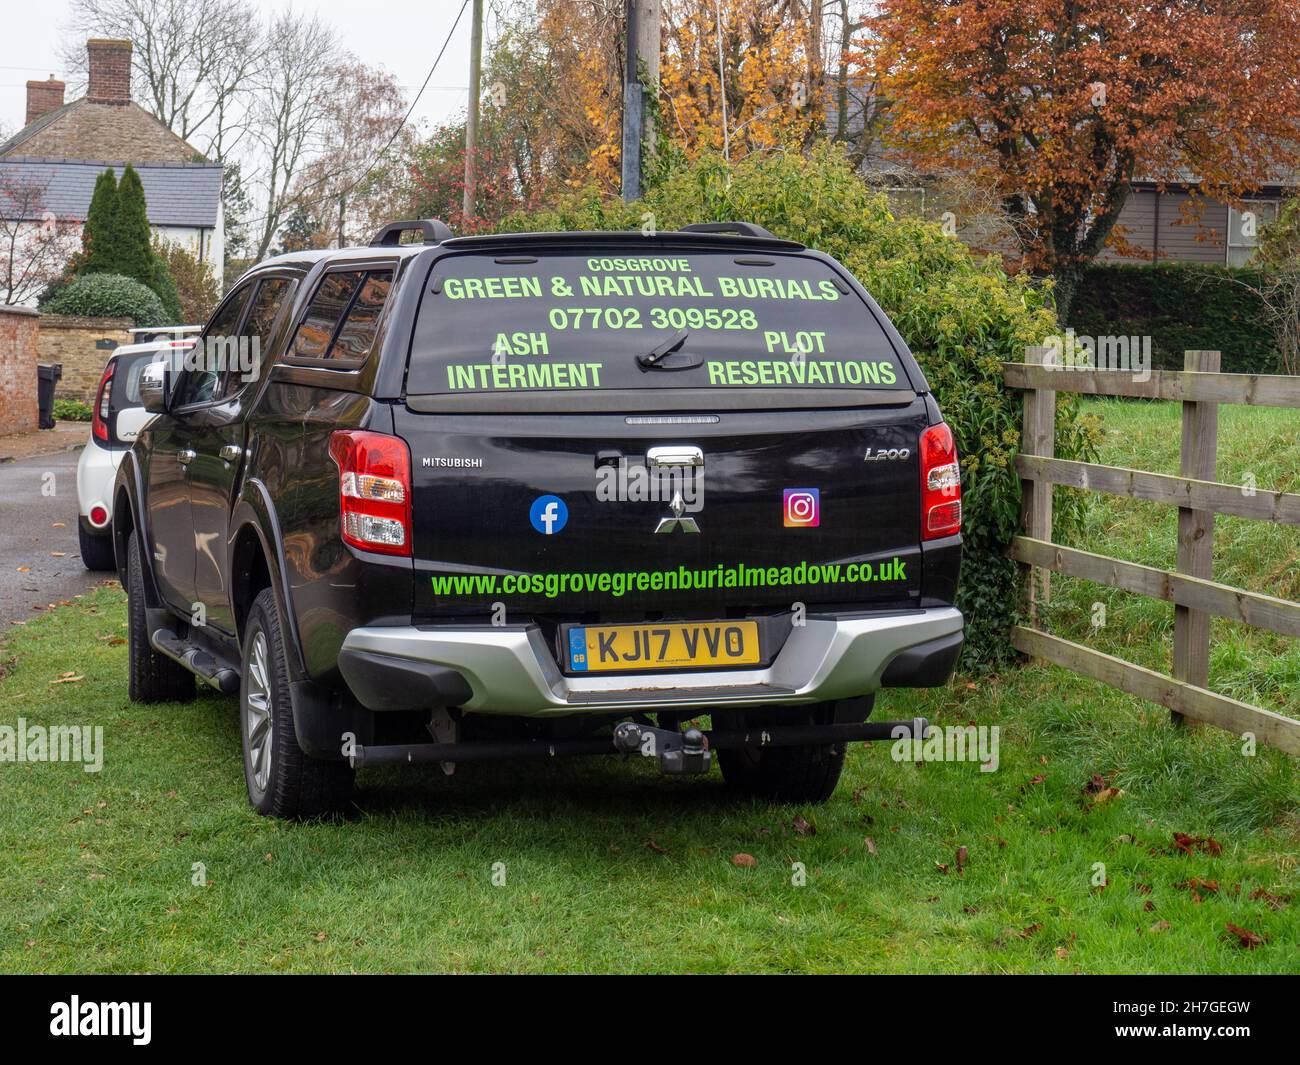 Mitsubishi vehicle with advertising for the Cosgrove Green Burial Meadow on the rear; Gayton village, Nortrhamptonshire, UK Stock Photo